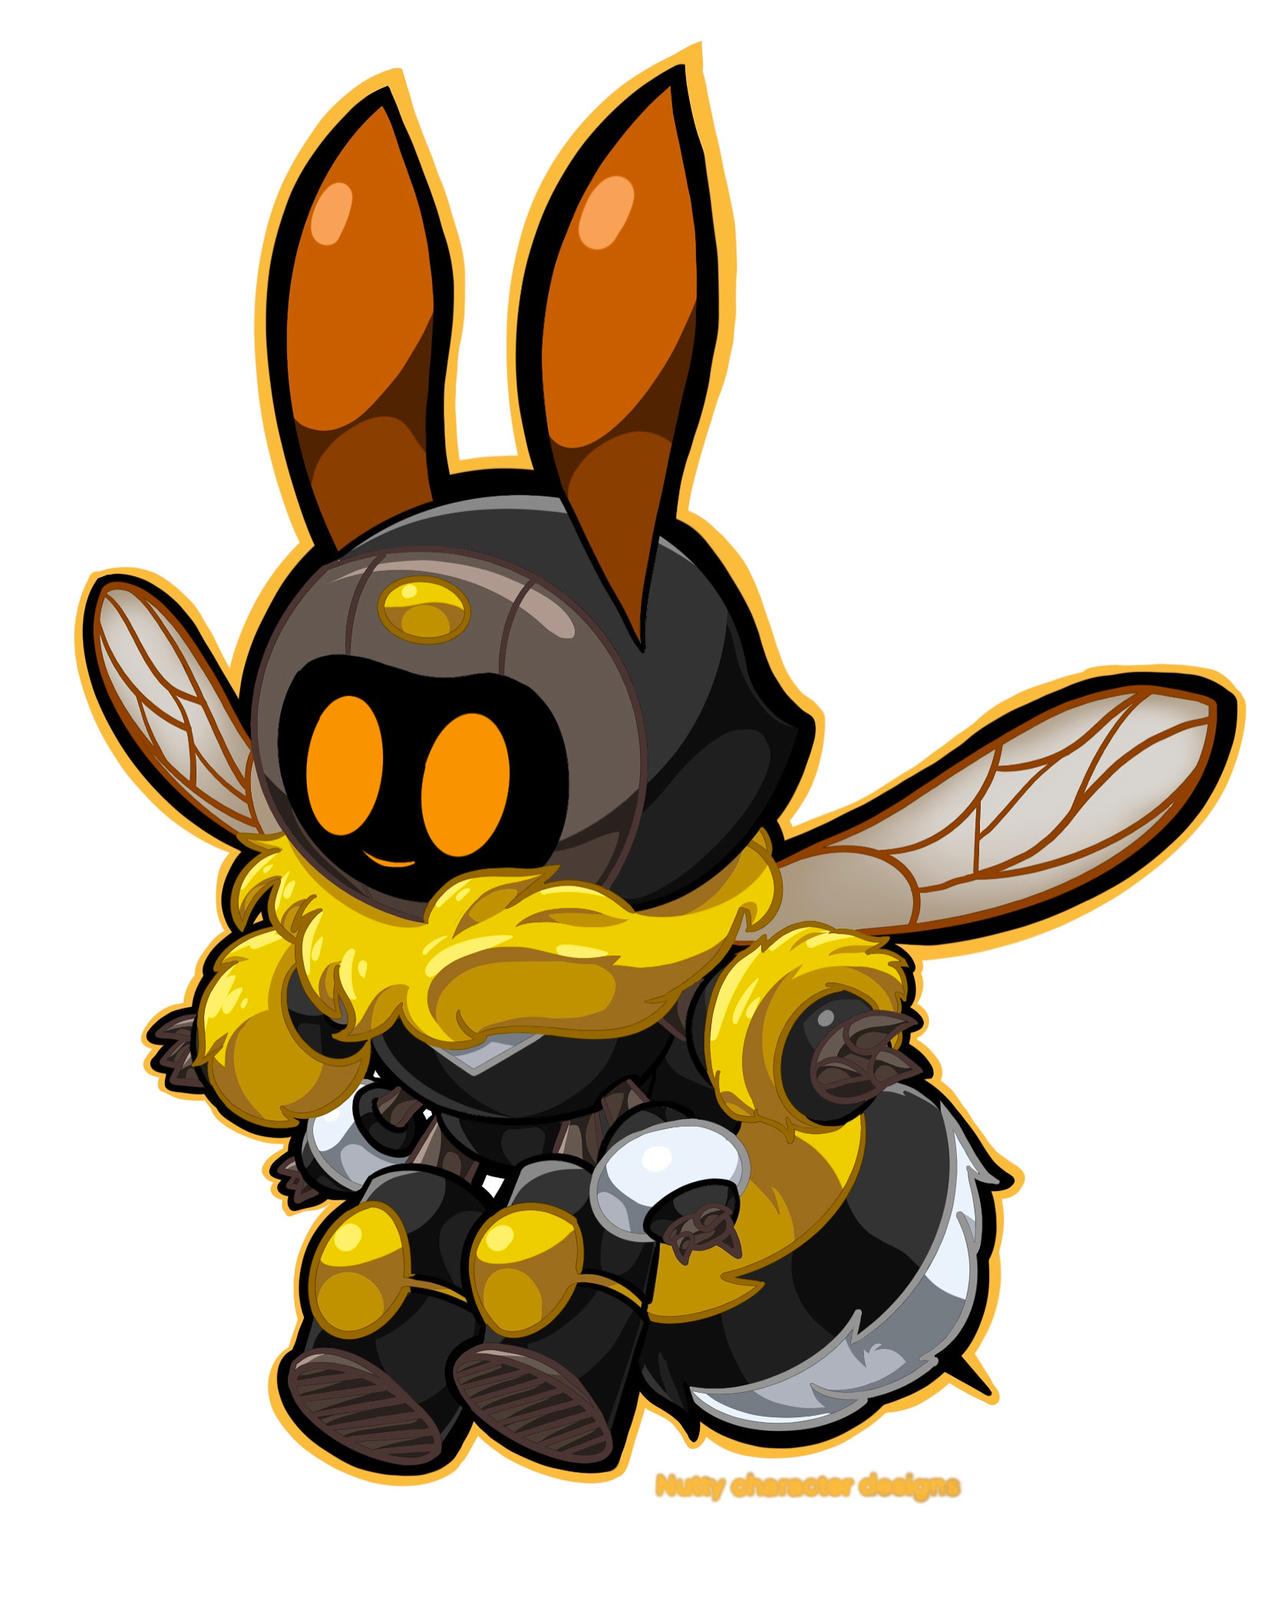 Bug bot 023: bumble bee by nuttybutterx on DeviantArt